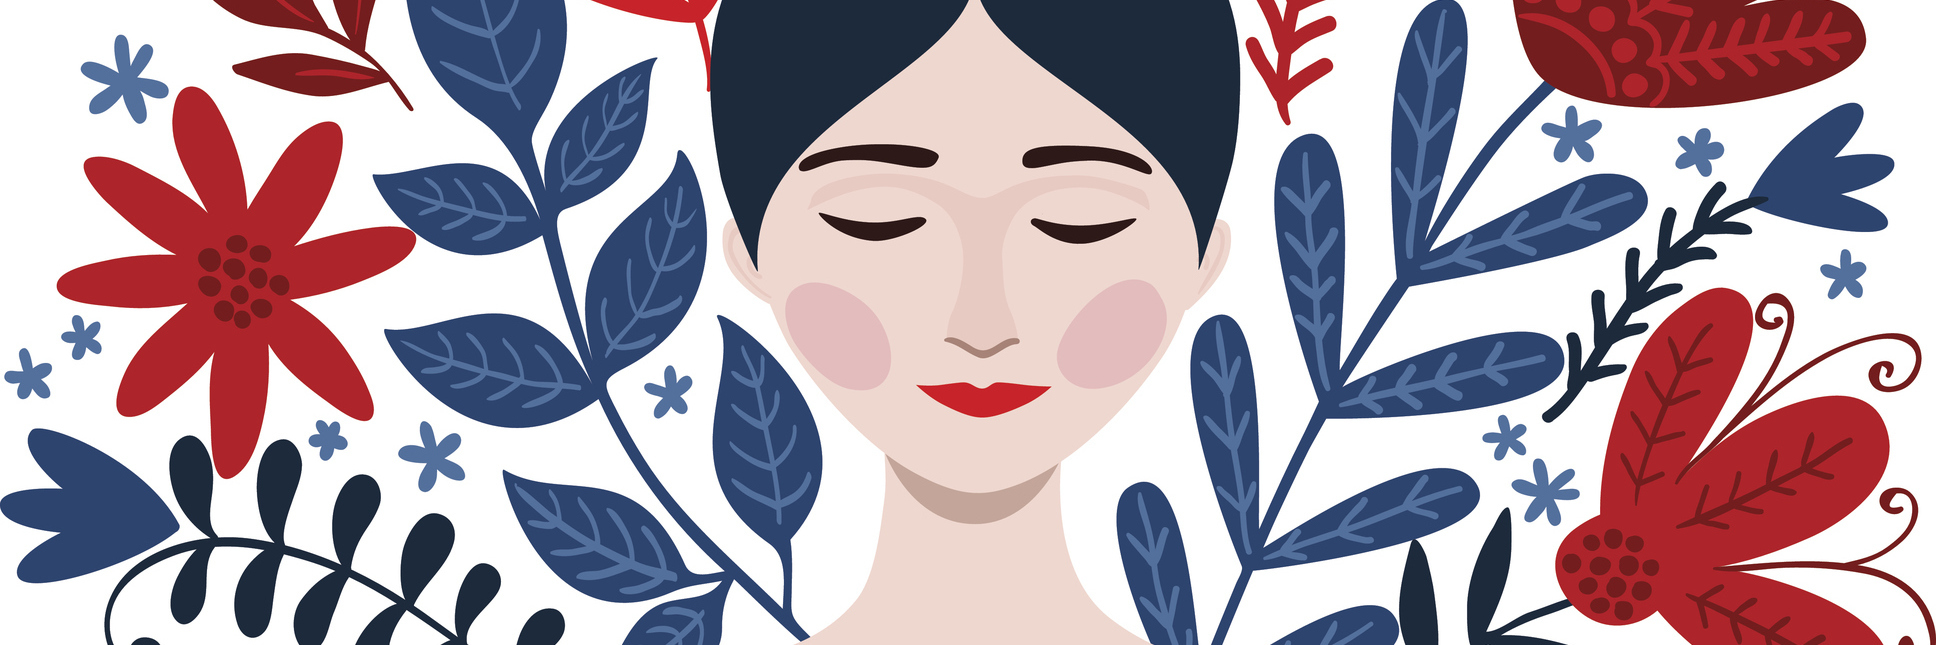 illustration of a woman with red and blue flowers around her